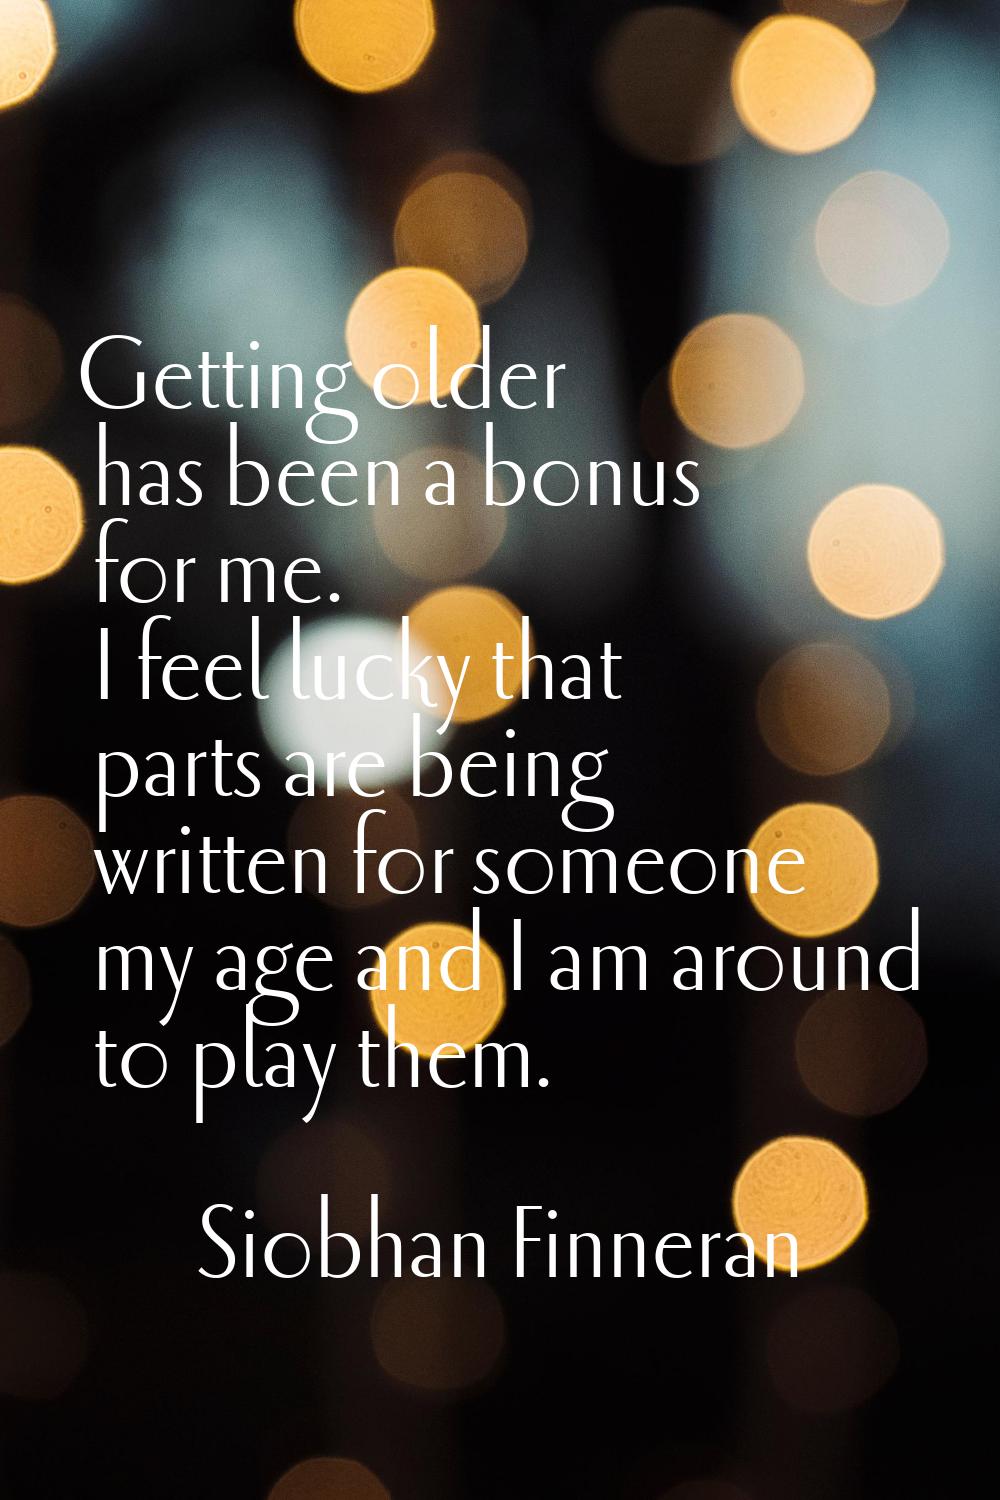 Getting older has been a bonus for me. I feel lucky that parts are being written for someone my age